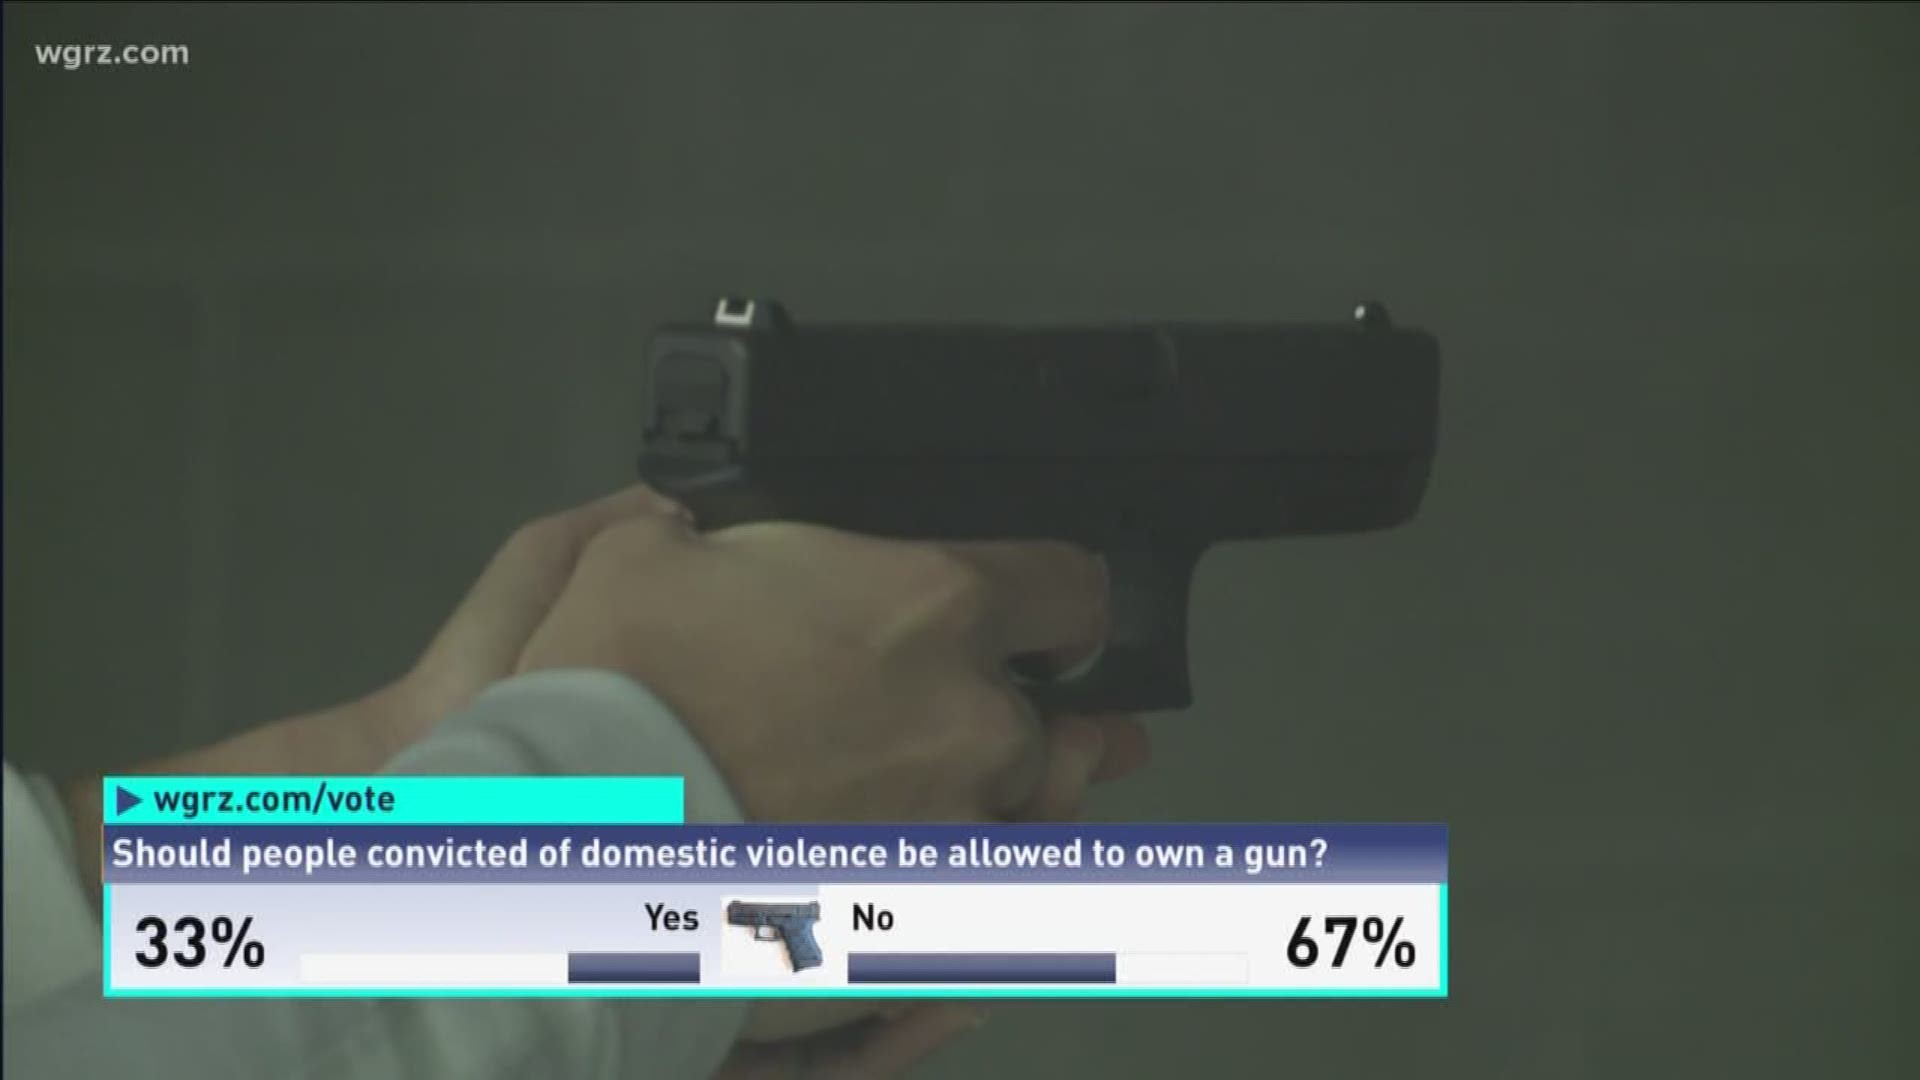 A new law in New York State will allow law enforcement to confiscate the guns of convicted domestic abusers.